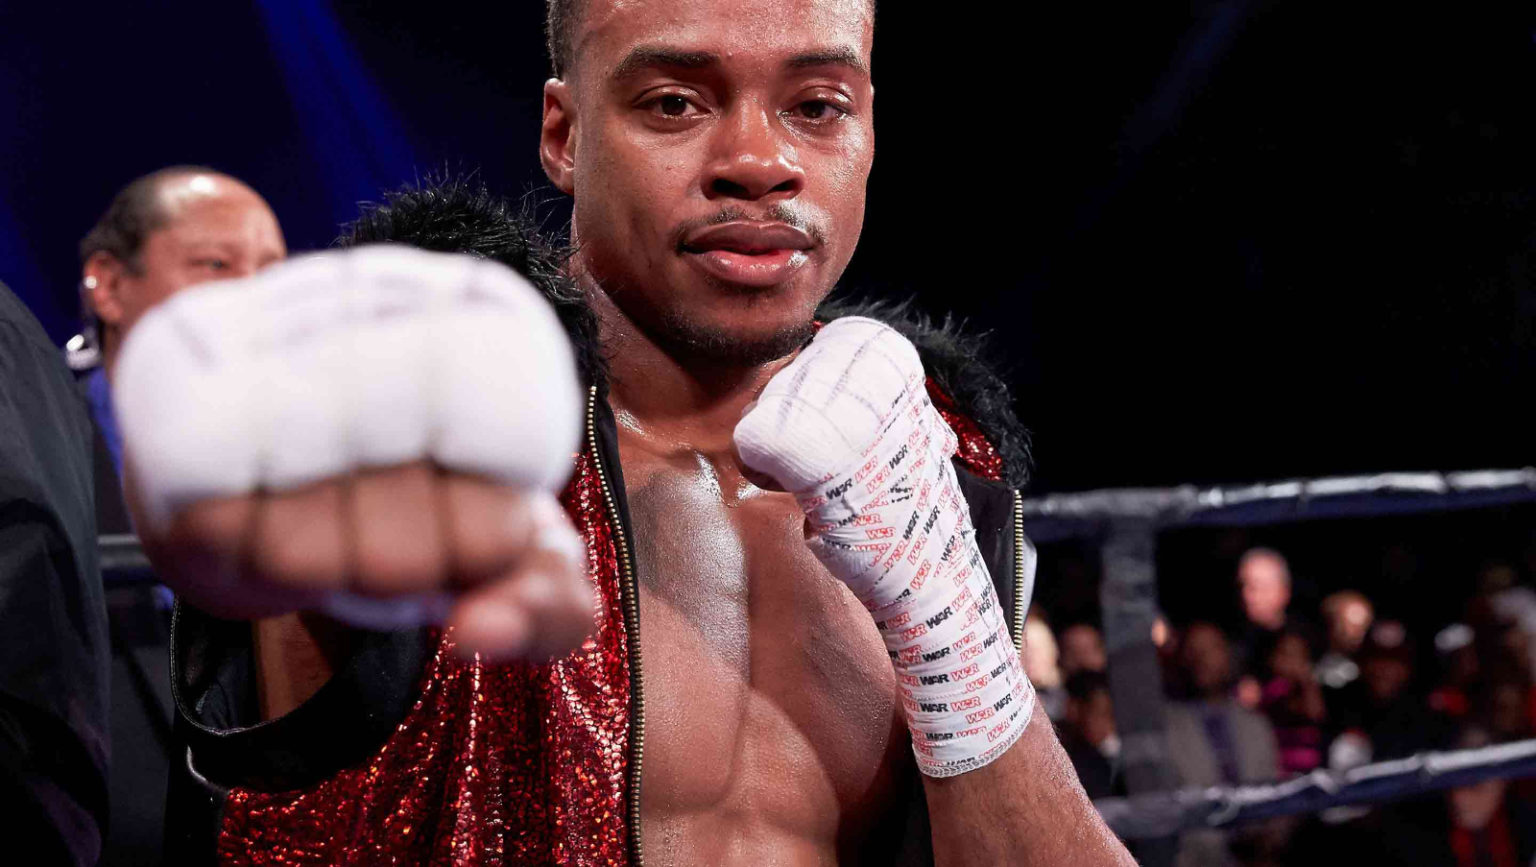 Manny Pacquiao Vs. Errol Spence – Done Deal For Aug.21 In Las Vegas. There will be a fight.